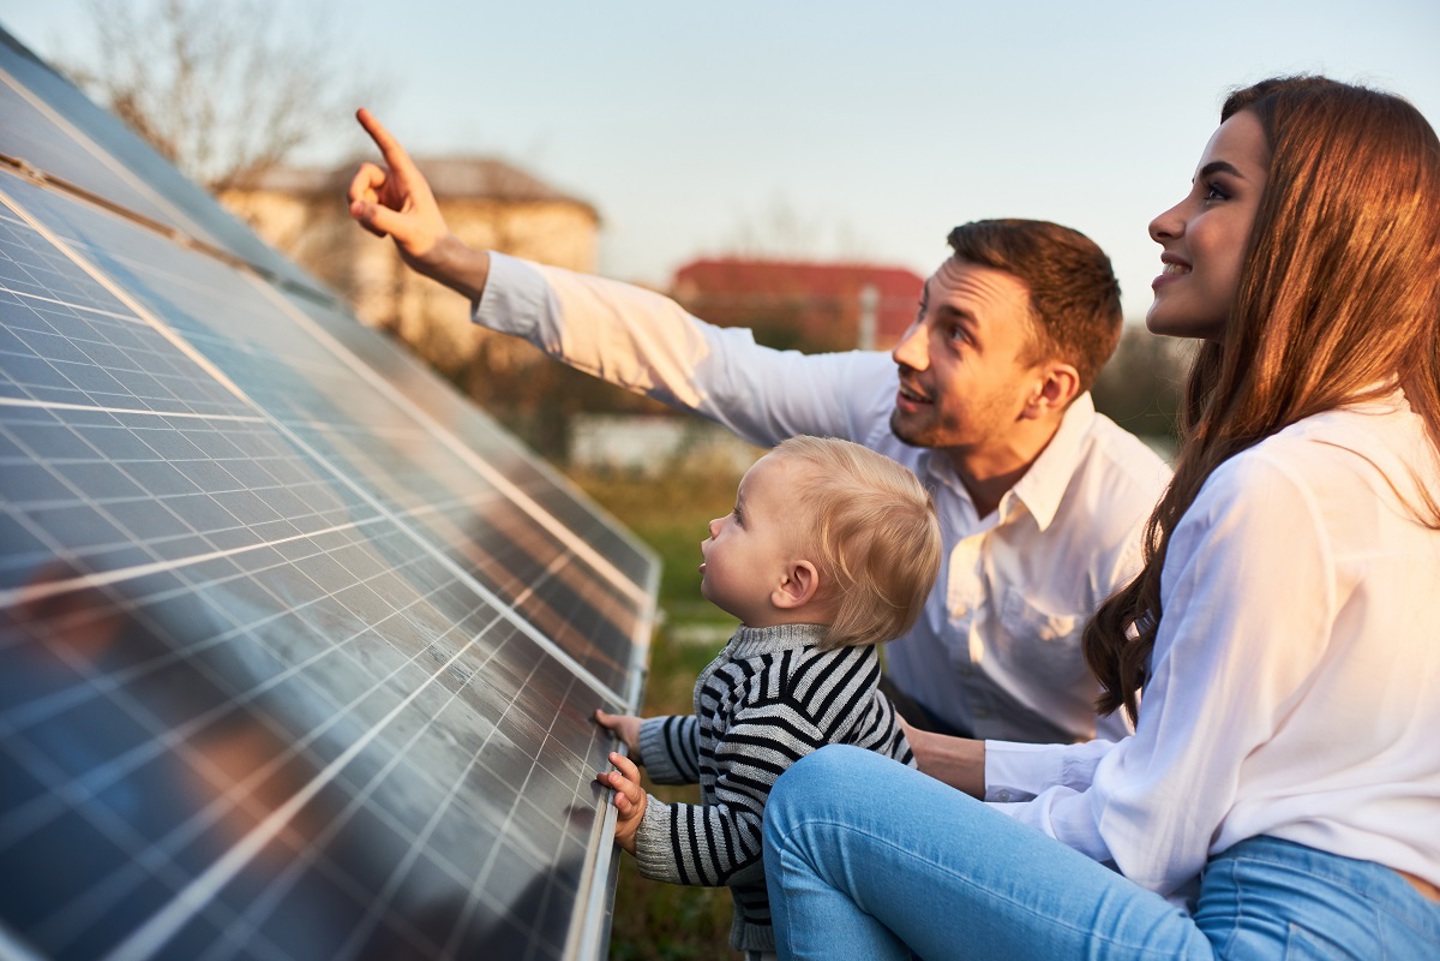 Image of two people looking at solar panels